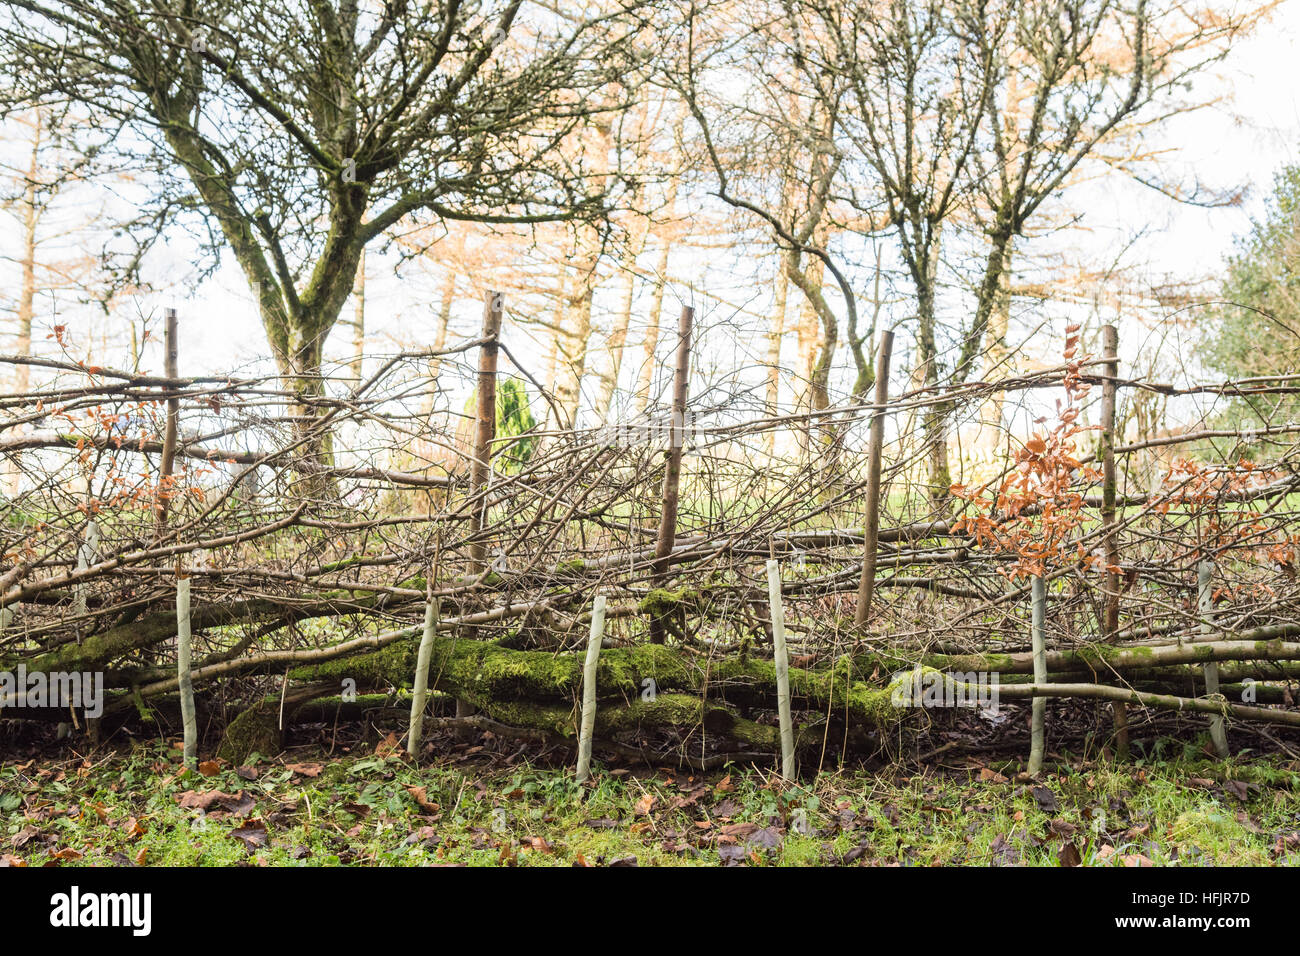 Hedge laying in a traditional rural garden in Scotland, UK Stock Photo